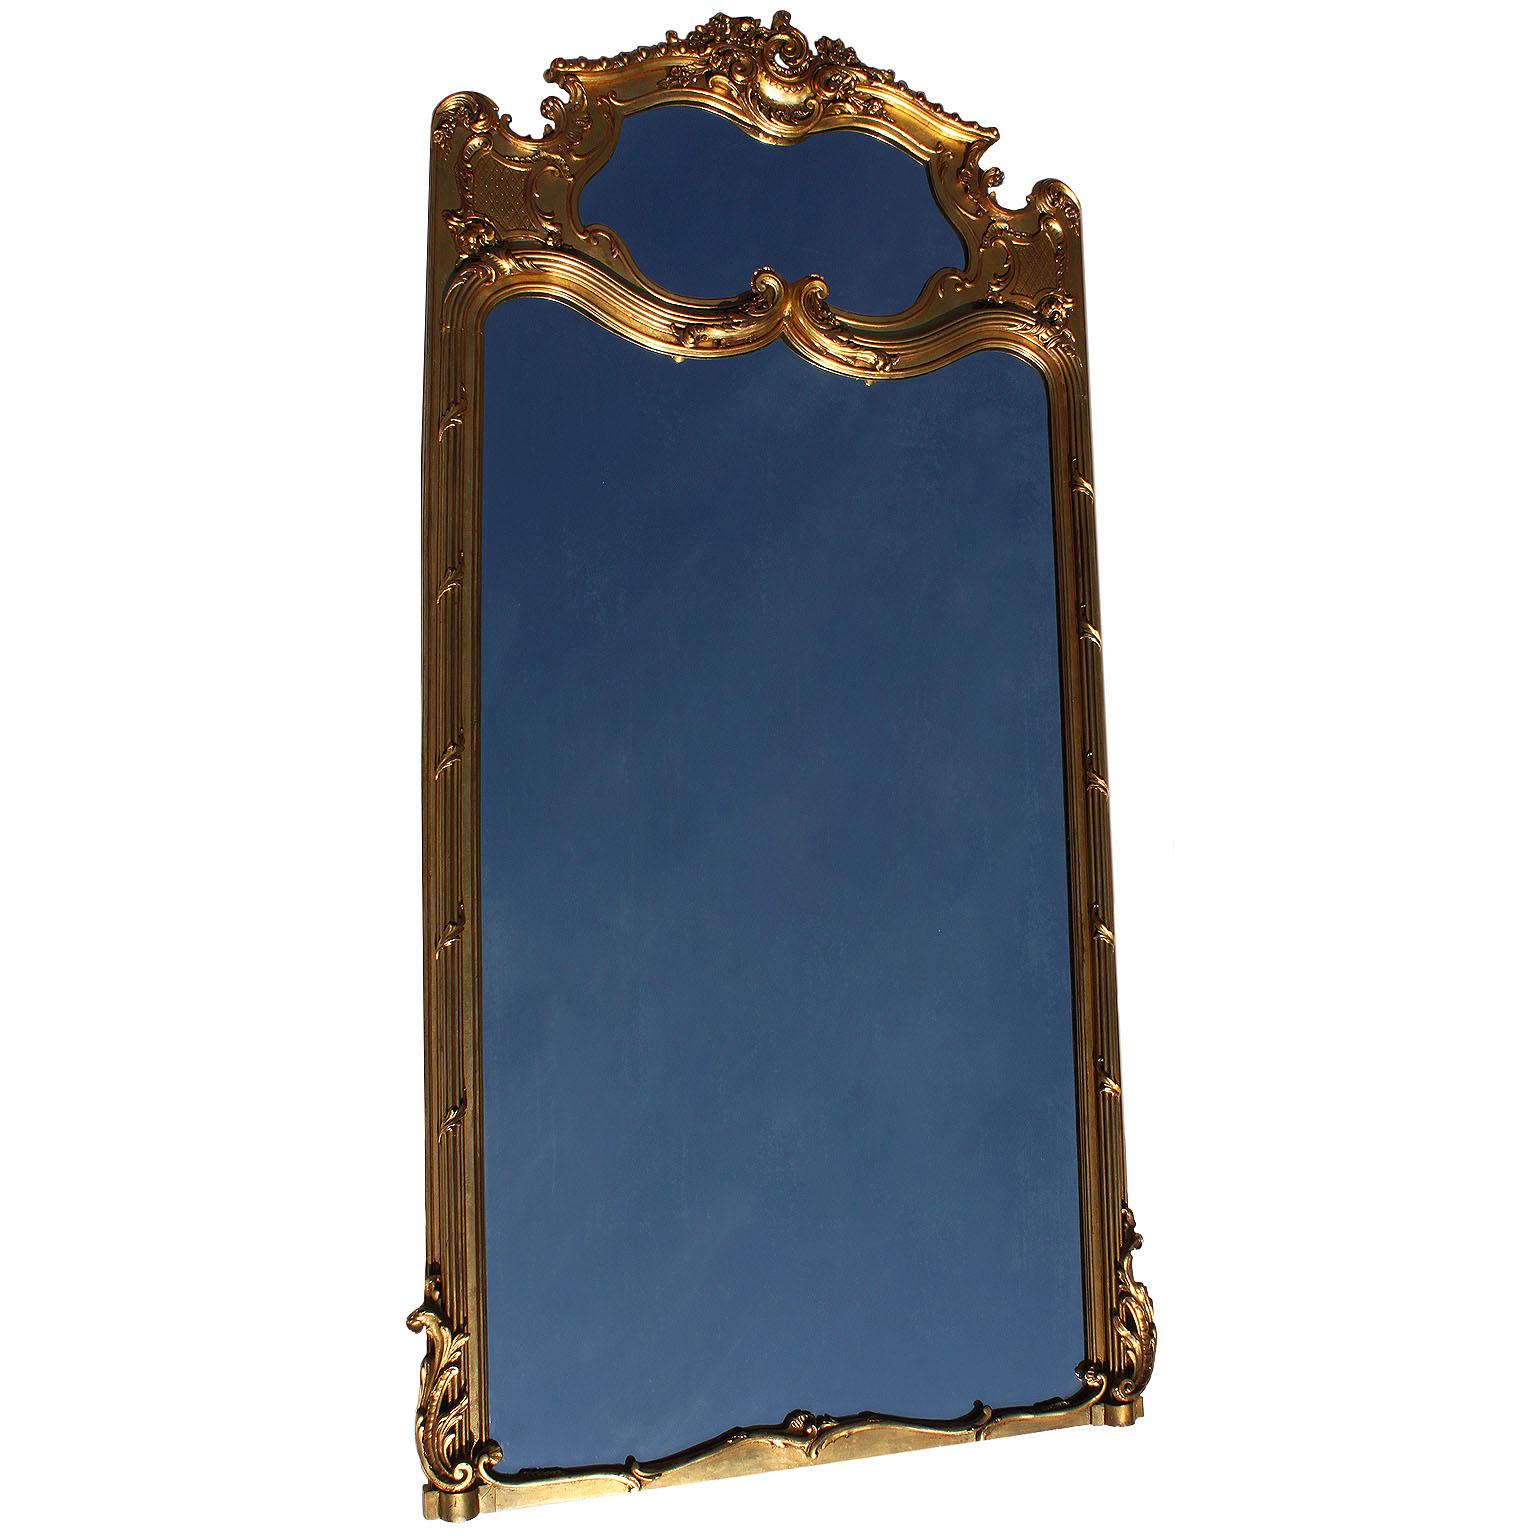 French 19th-20th Century Louis XV Style Giltwood Carved Trumeau Mirror Frame For Sale